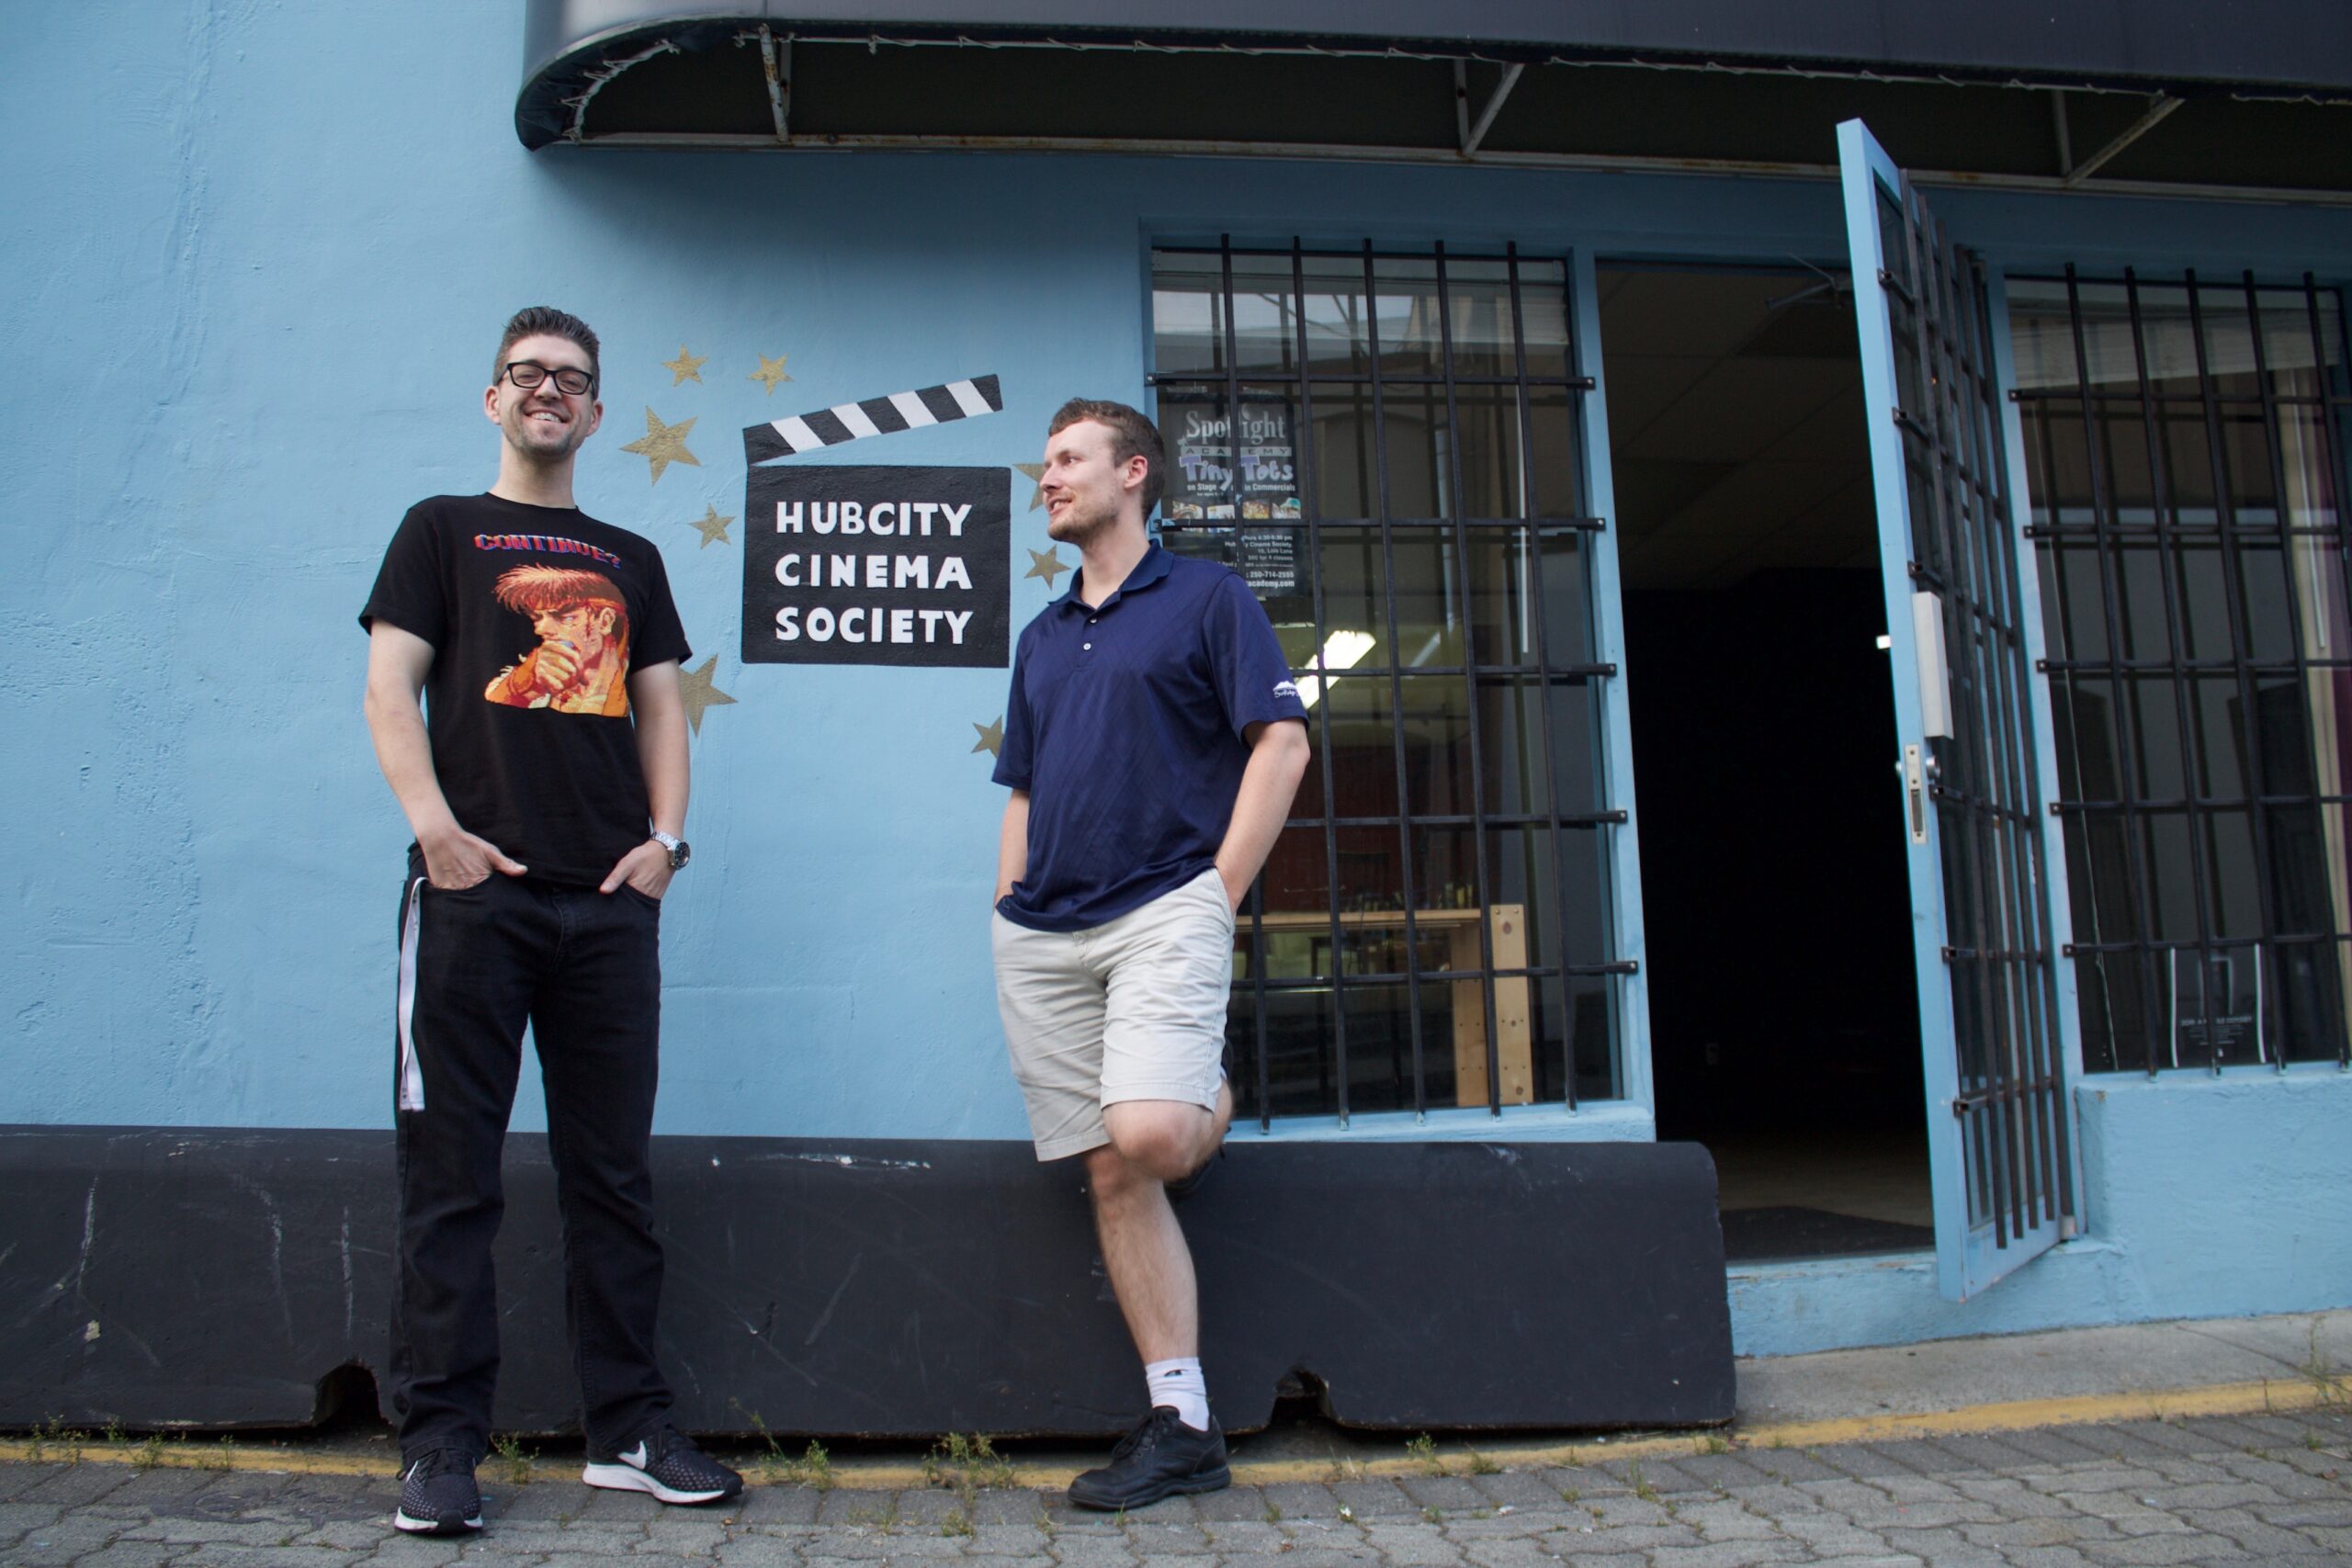 Two men stand a meter apart at the entrance of HCCS’s headquarters. The door to society is open while both men entertain each other; the logo of the nonprofit organization is painted on the wall and between both co-founders. The logo is a clapperboard with the name Hub City Cinema Society within it.